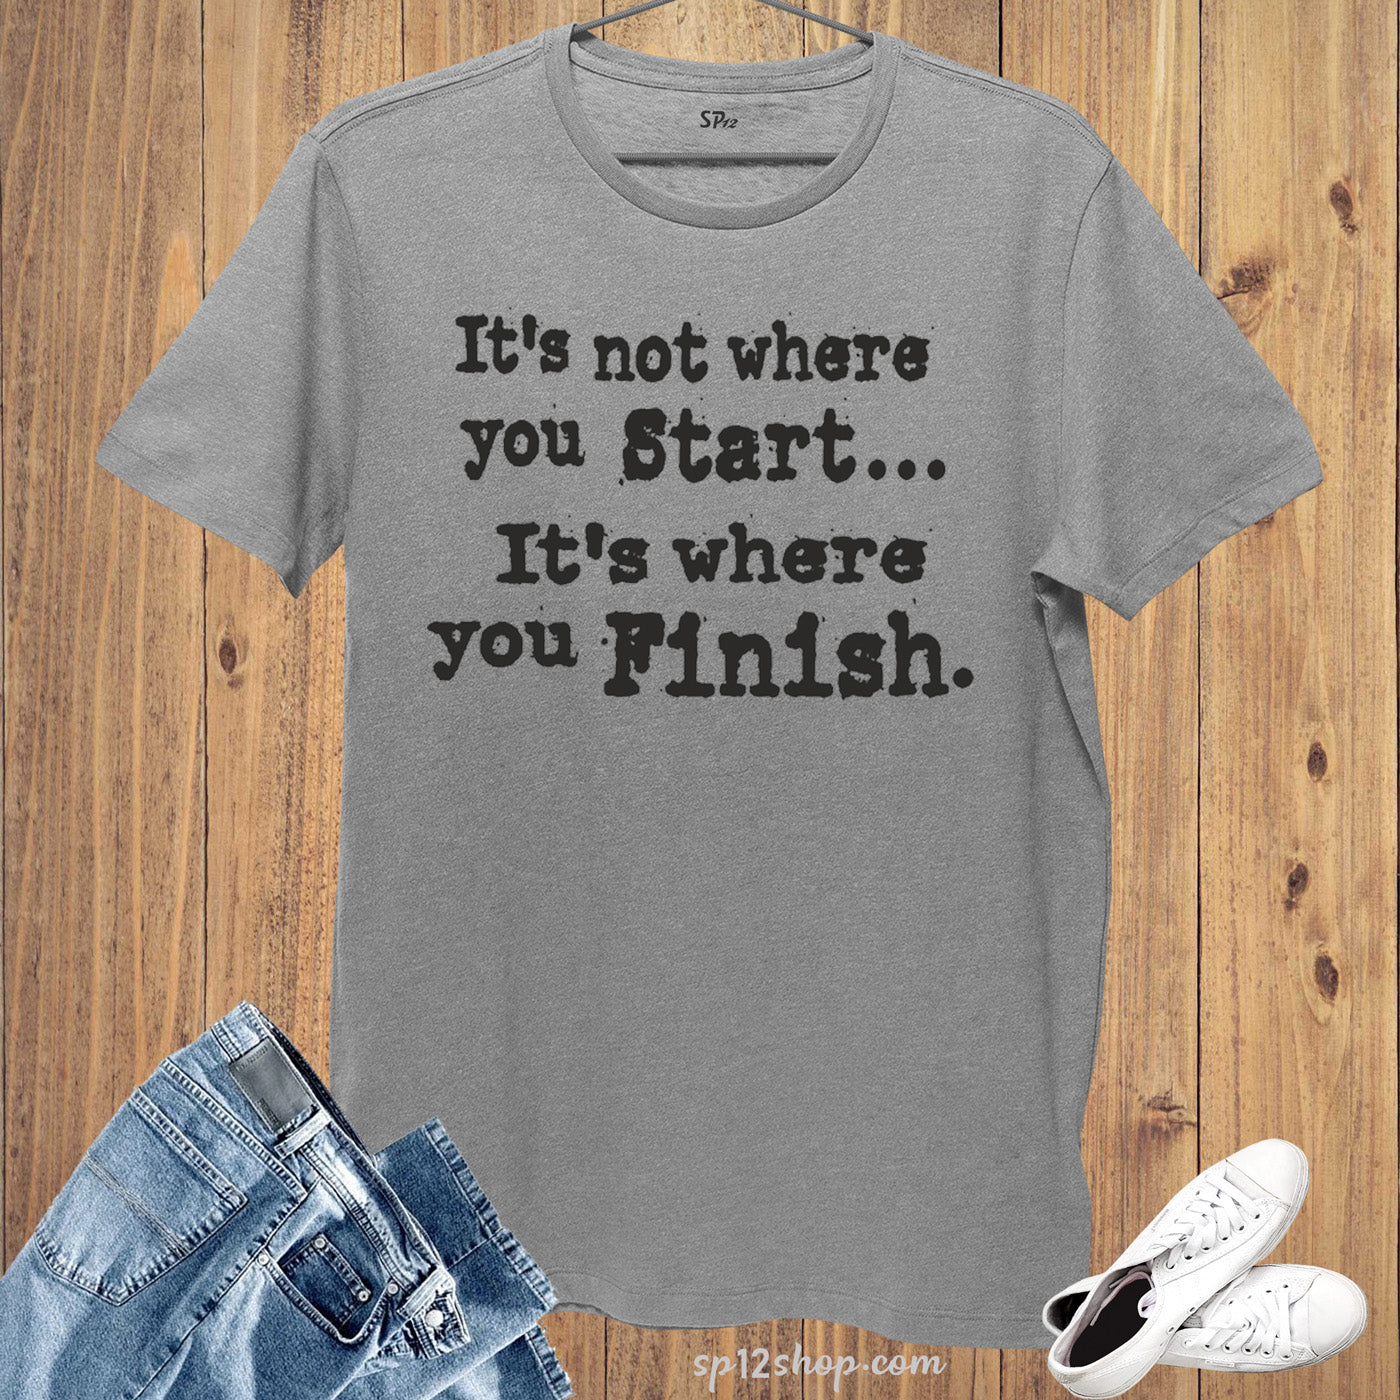 It is not where you start it is where you Finish Slogan T-Shirt